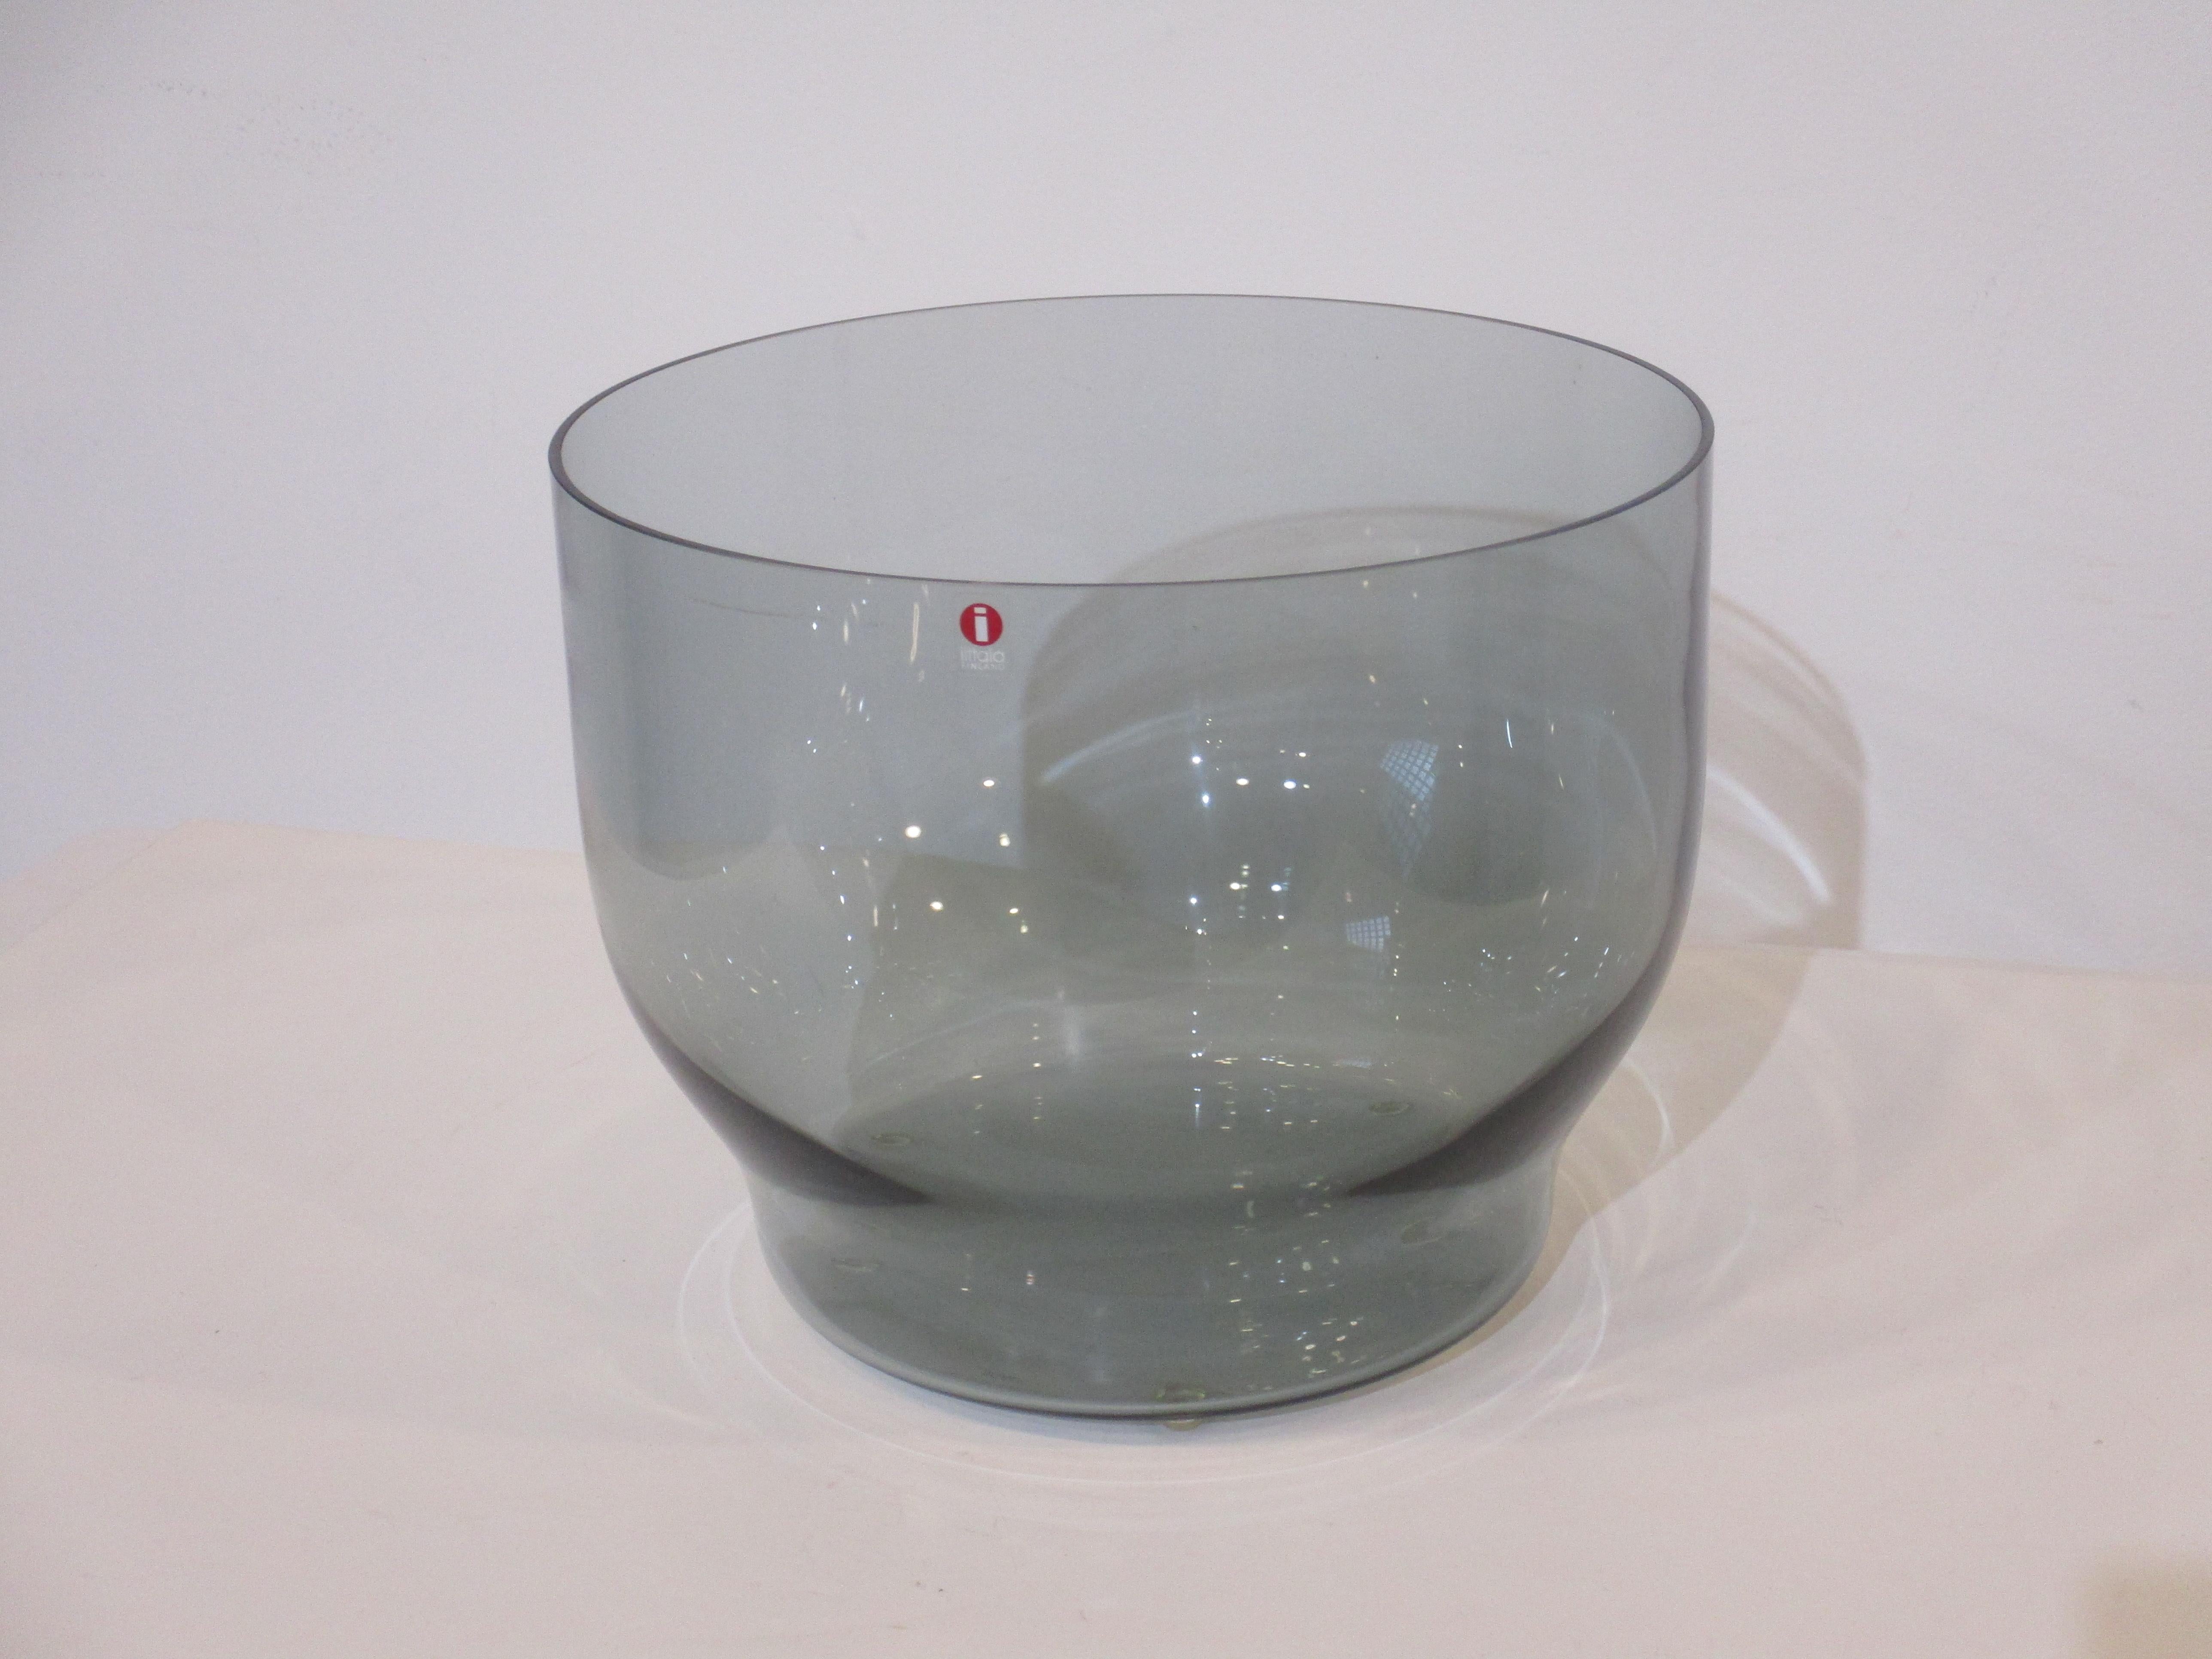 A large smoked glass decorative center piece bowl designed by Carina Seth Andersson for Iittala made in Finland . A light and airy feel just the right piece for your table with that touch of Scandinavian style.